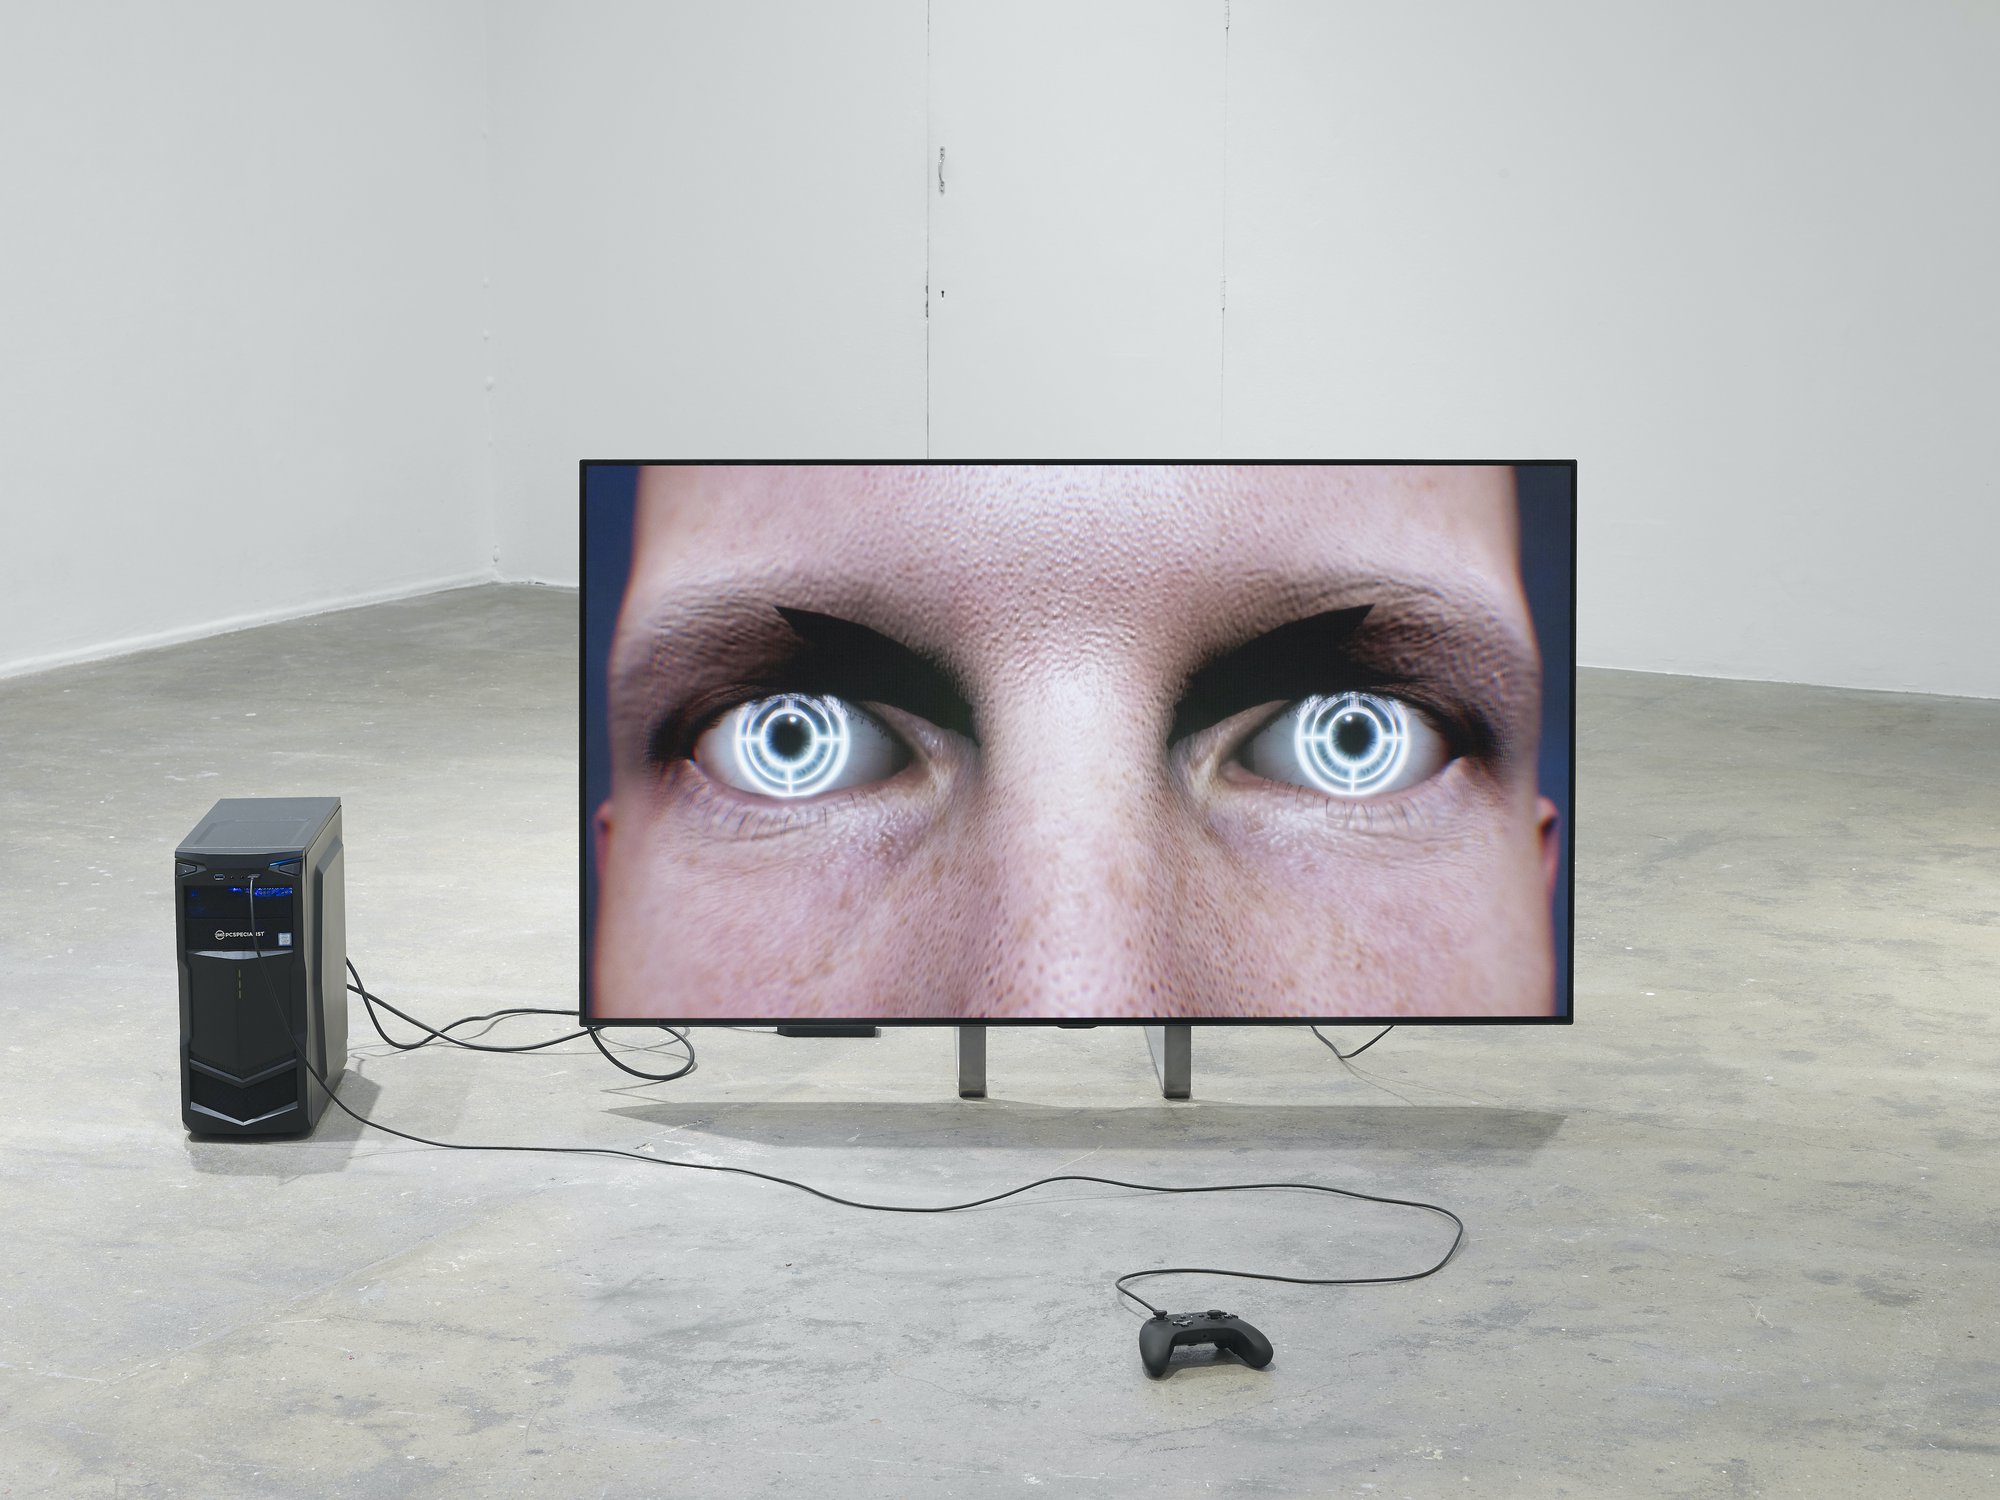 Sidsel Meineche Hansen, End-used City 2077, computer-generated images, game controller, PC, video, sound, duration: 12 min., 2019-2021. Installation view, Welcome to End-Used City, Chisenhale Gallery, London, 2019